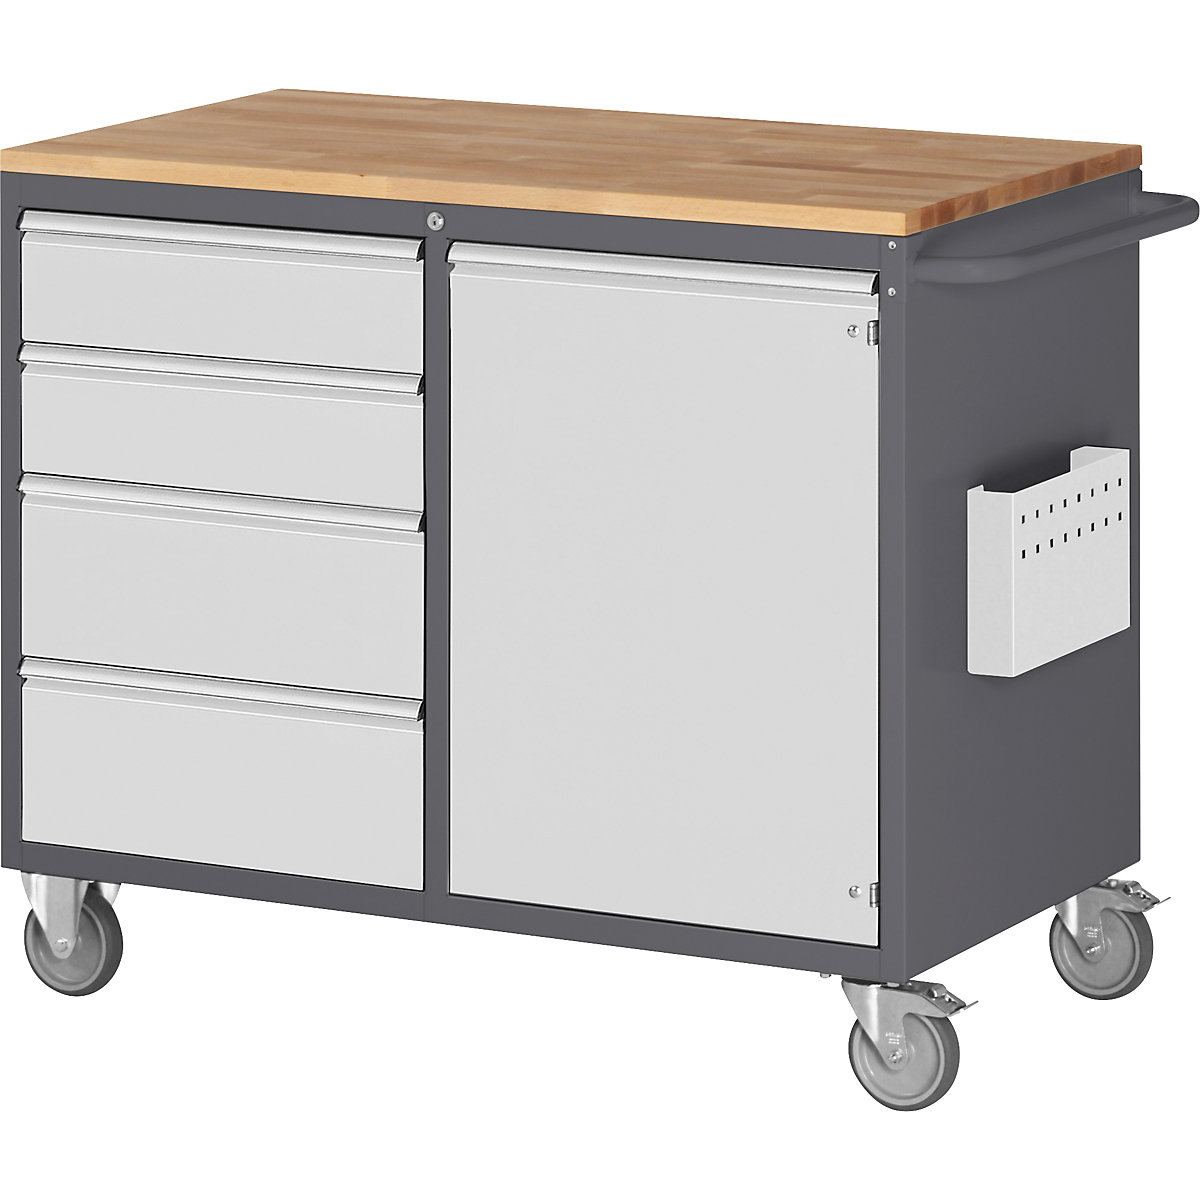 Compact workbenches, mobile – RAU, 4 drawers, 1 door, wood work surface, charcoal / light grey-2